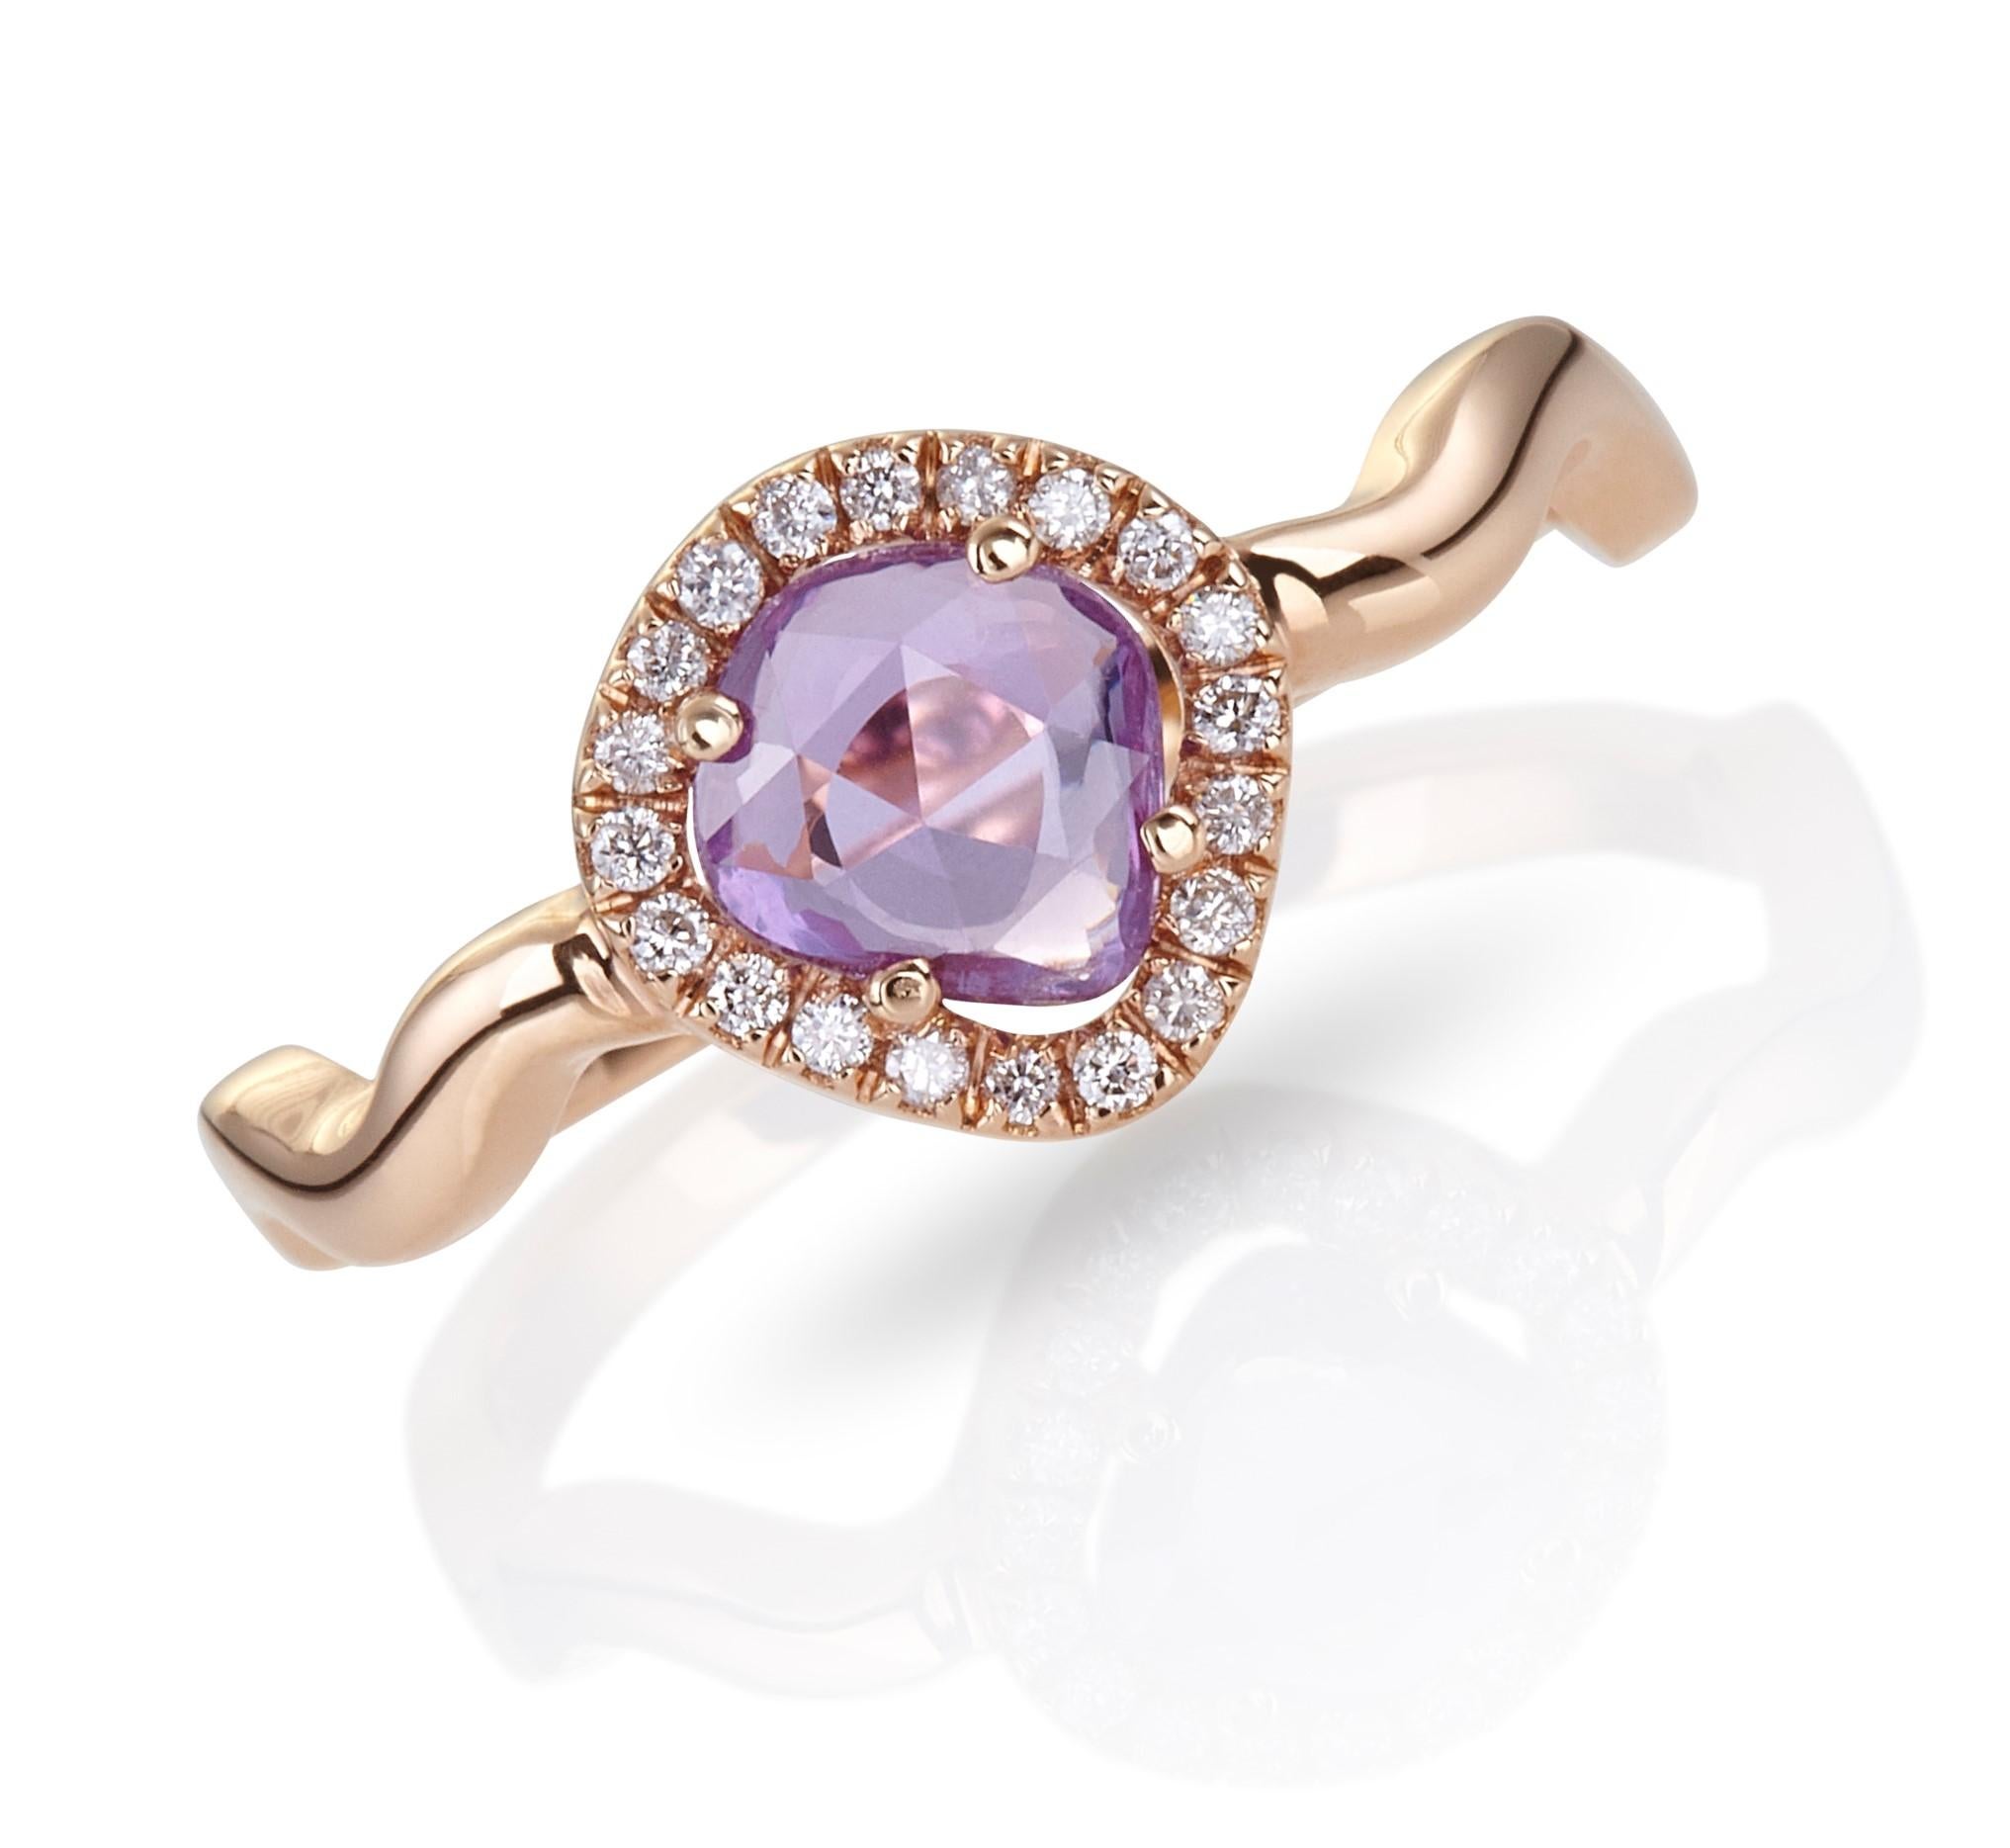 For Sale:  Zic Zac Ring in 18Kt Rose Gold with Pink, Violet Rose Cut Sapphire and Diamond 5